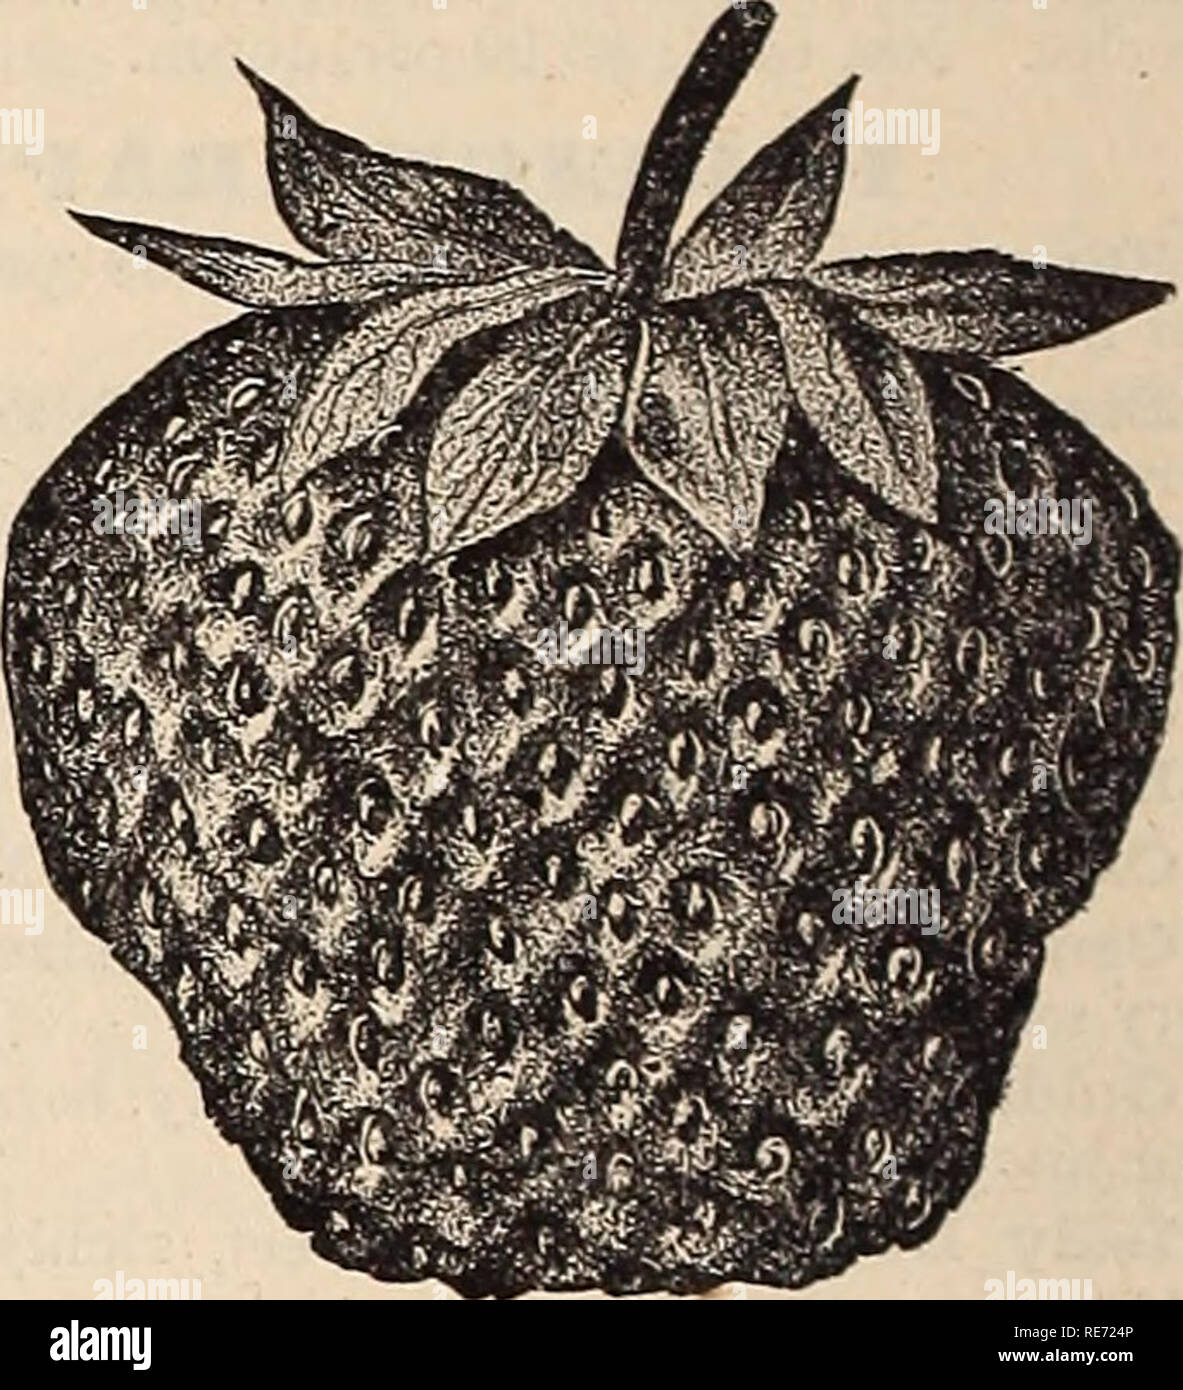 . Cox's seed annual. Seed industry and trade Catalogs; Seeds Catalogs; Flowers Seeds Catalogs; Fruit Seeds Catalogs; Plants, Ornamental Catalogs; Trees Catalogs. Capt. Jack. oooooooooooooooo STRAWBERRY PLANTS. Price.—$2.00 per hundred; $10.00 per thousand. Captain Jack. Bright red, firm. Crescent Seedling Immensely pro- ductive, size medium. Glendale. Very late, large and firm. Monarch of the West. Strong grow- er; color bright red. Miner's Prolific. Large, deep crim- son. Sharpless. A mammoth variety; deep, clear red. Wilson's Albany. Fruit large, deep oooooooooooooooo. Sharpless. ANEMONE. Do Stock Photo